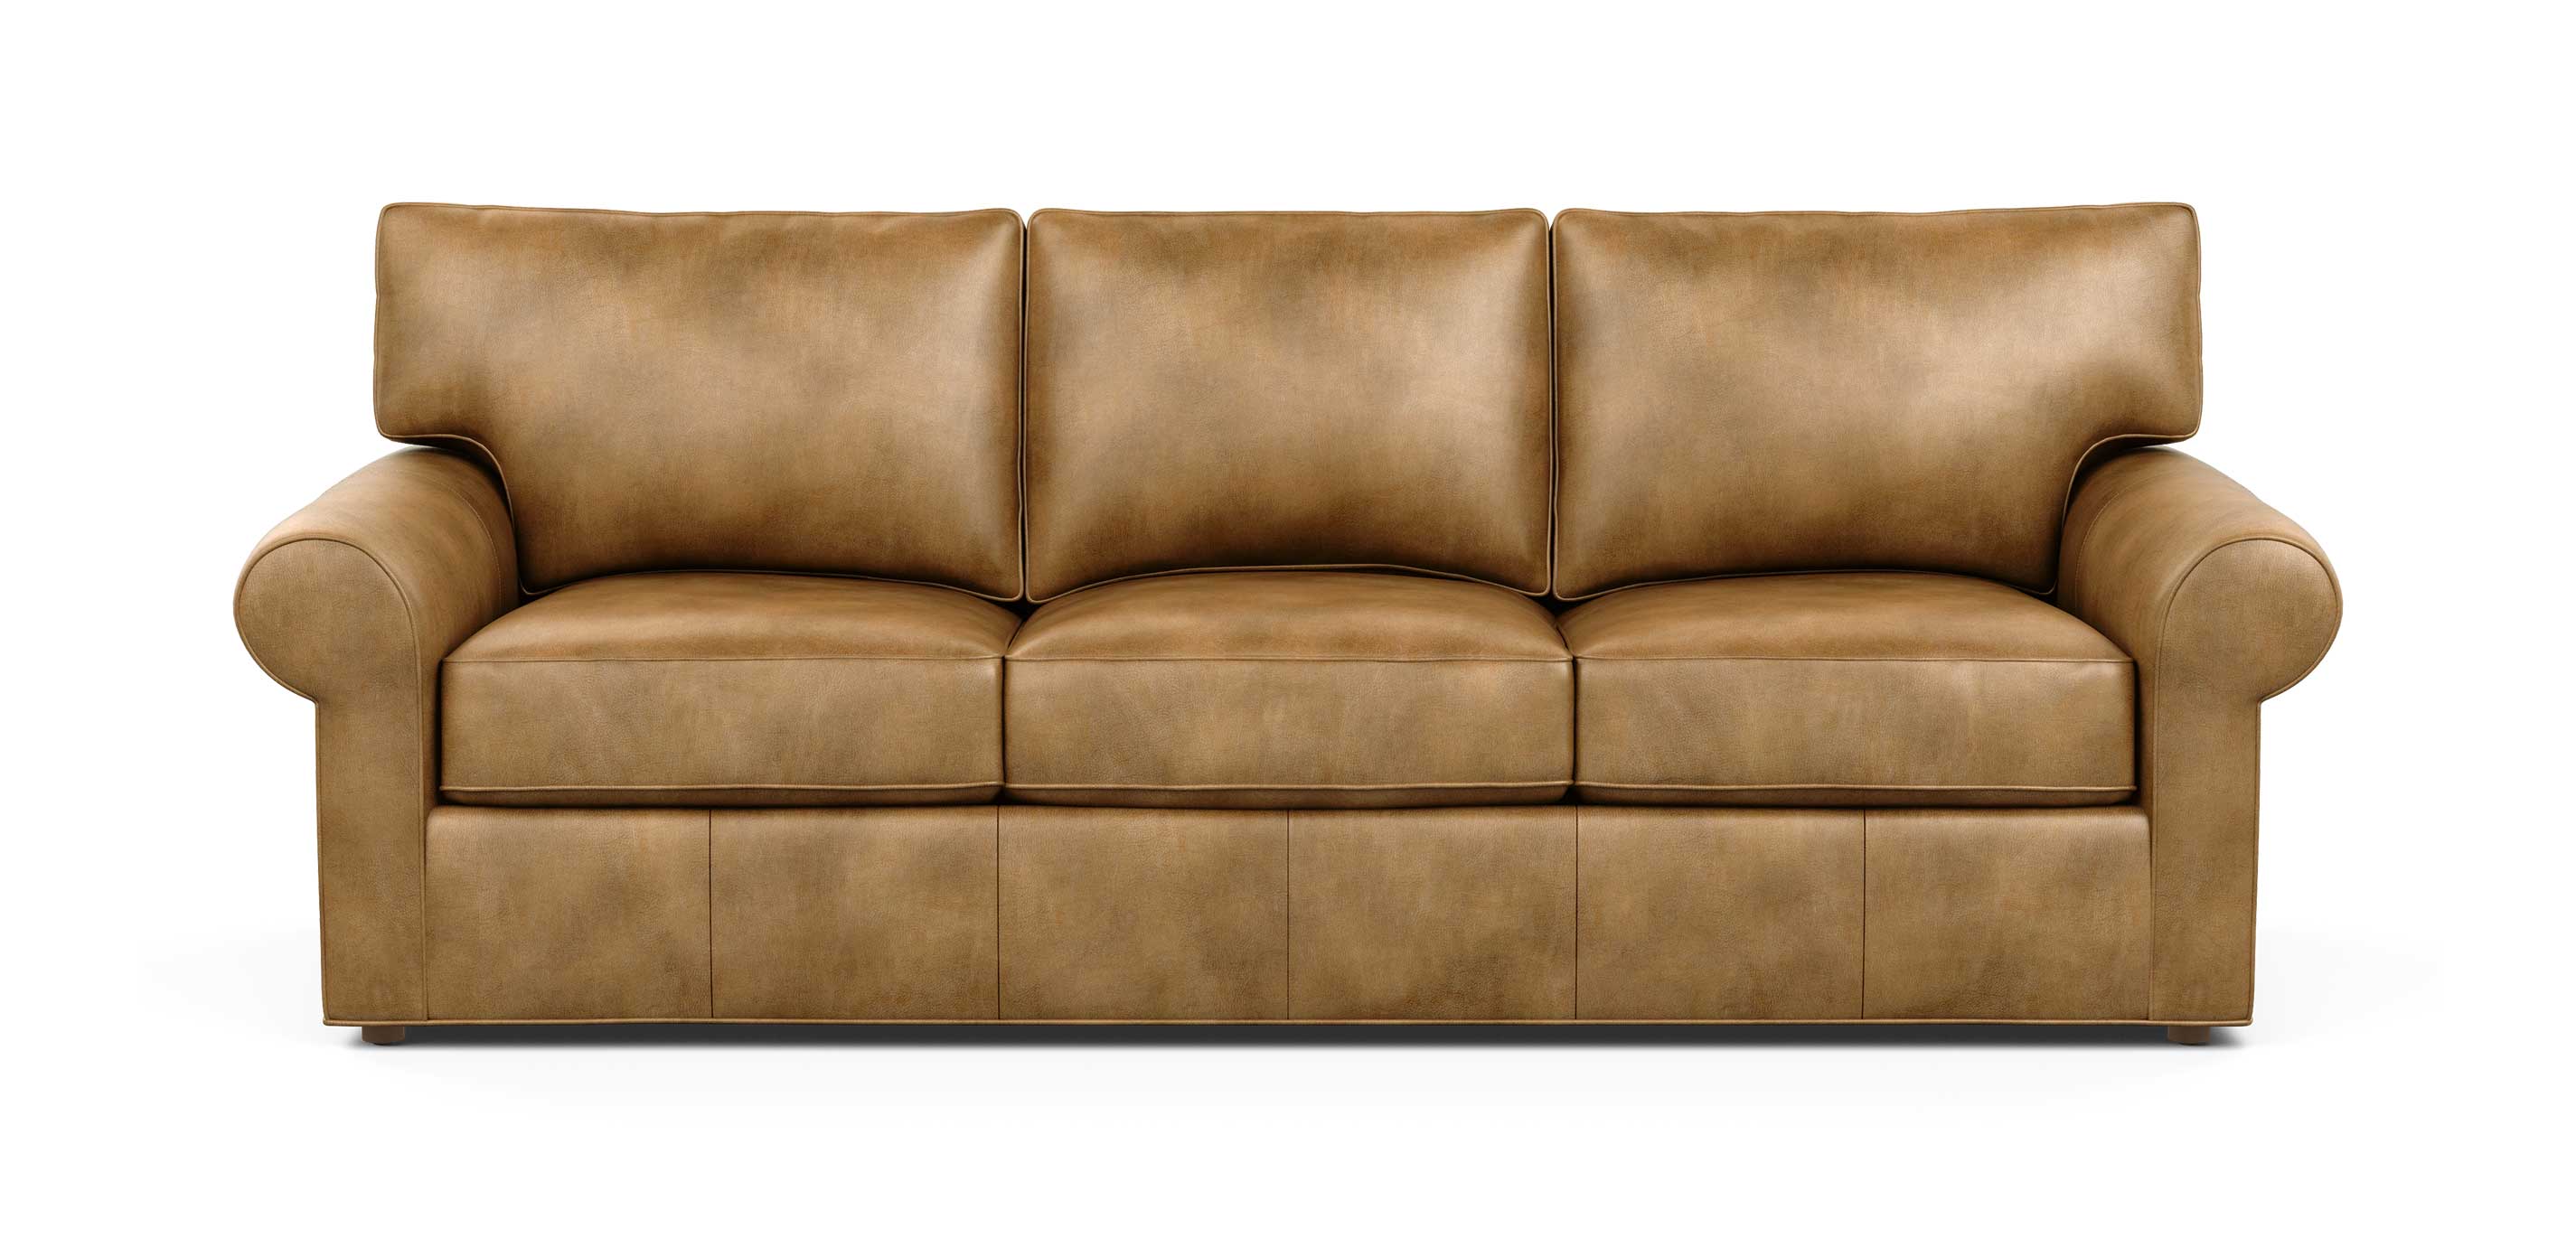 76 rolled arm leather sofa naiheads